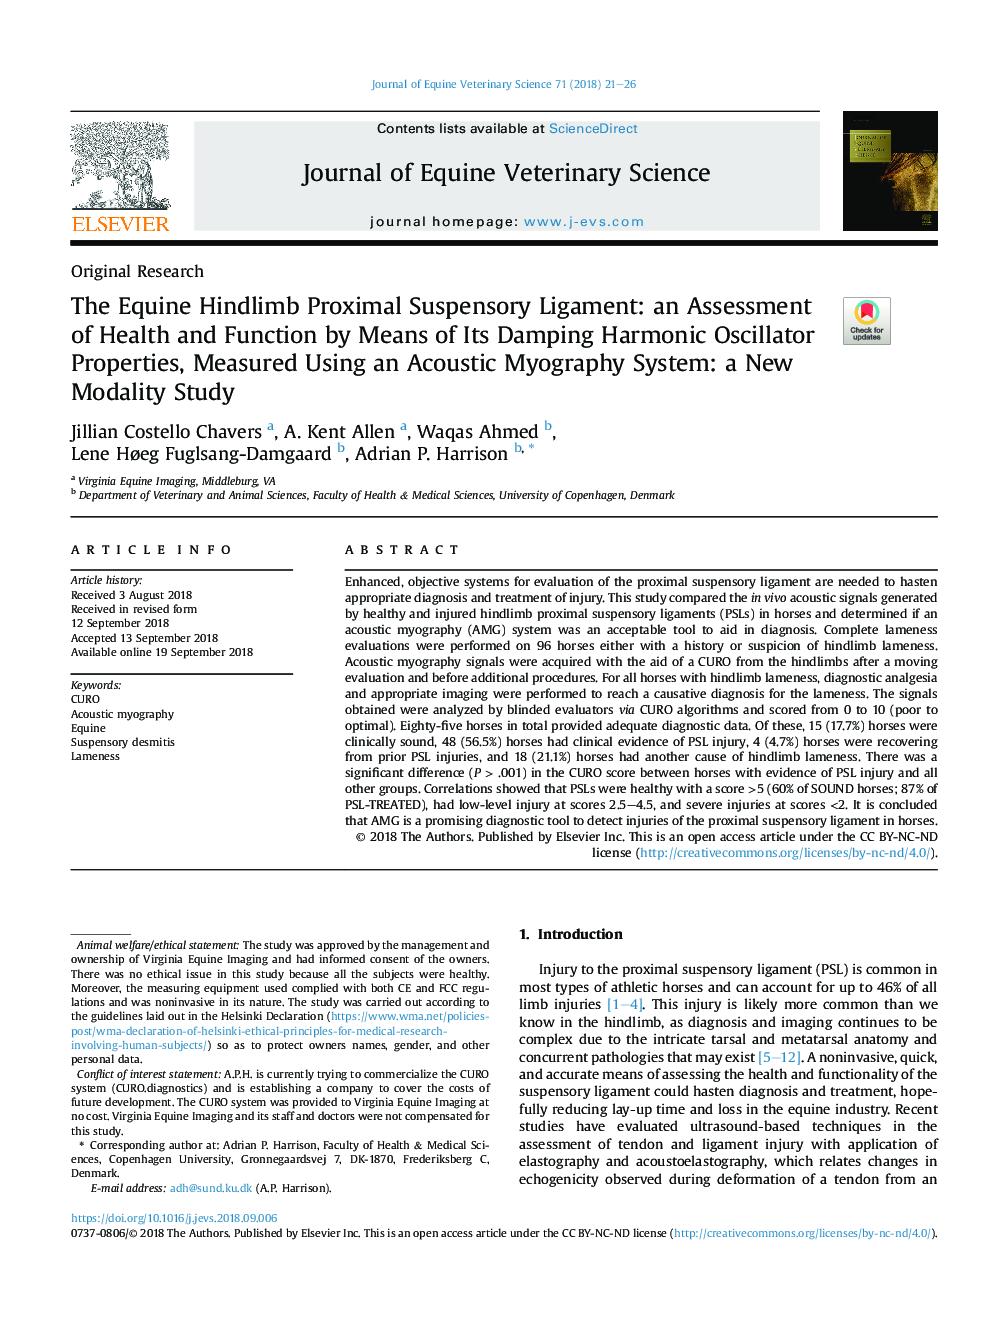 The Equine Hindlimb Proximal Suspensory Ligament: an Assessment of Health and Function by Means of Its Damping Harmonic Oscillator Properties, Measured Using an Acoustic Myography System: a New Modality Study